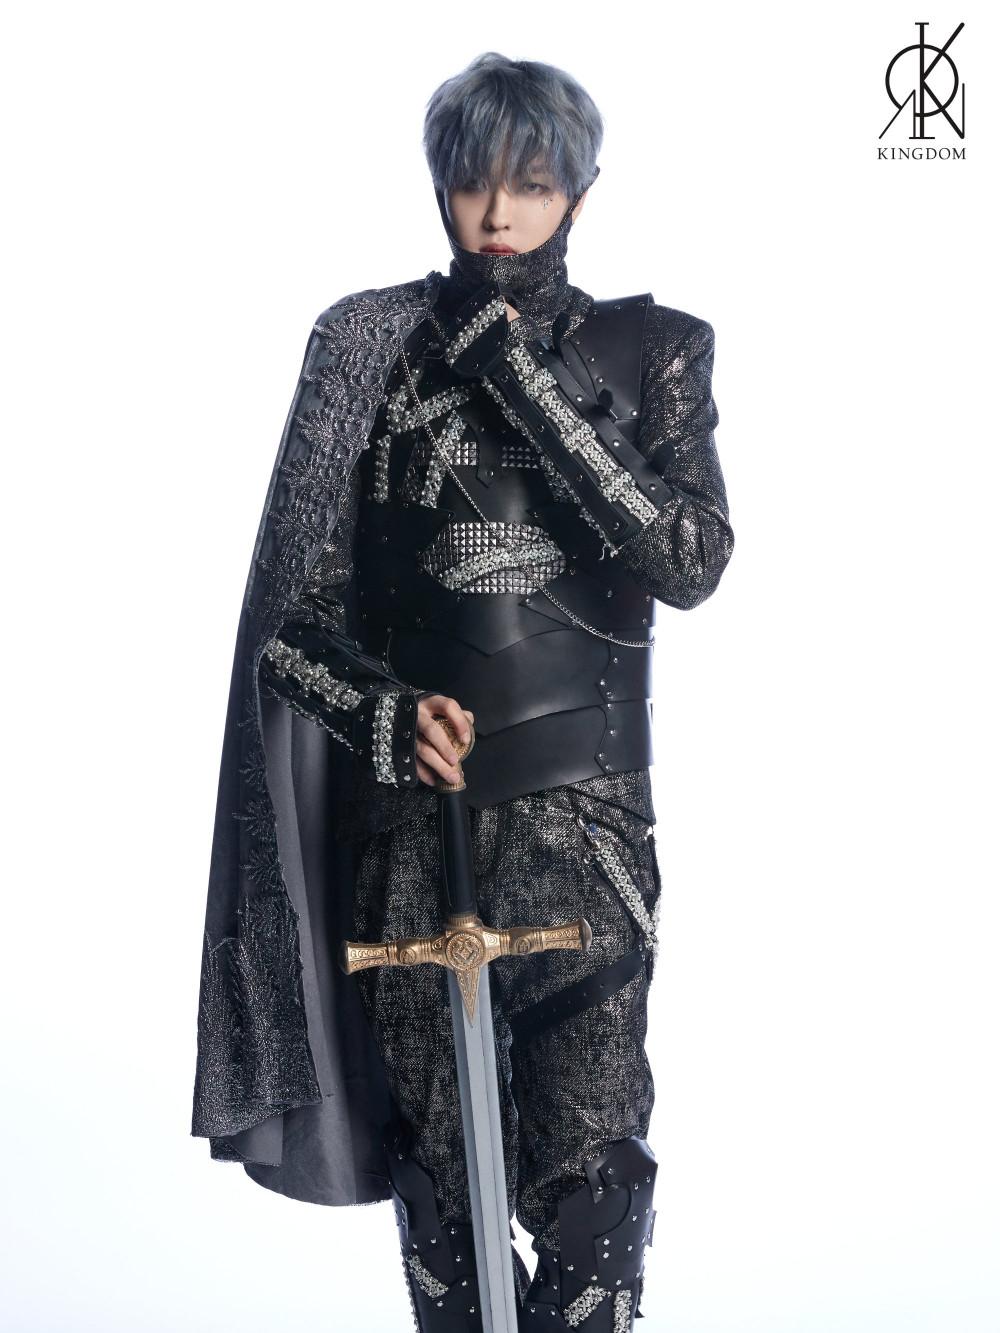 Kingdom Members Suit Up In Full Armor For Their Excalibur Debut Allkpop